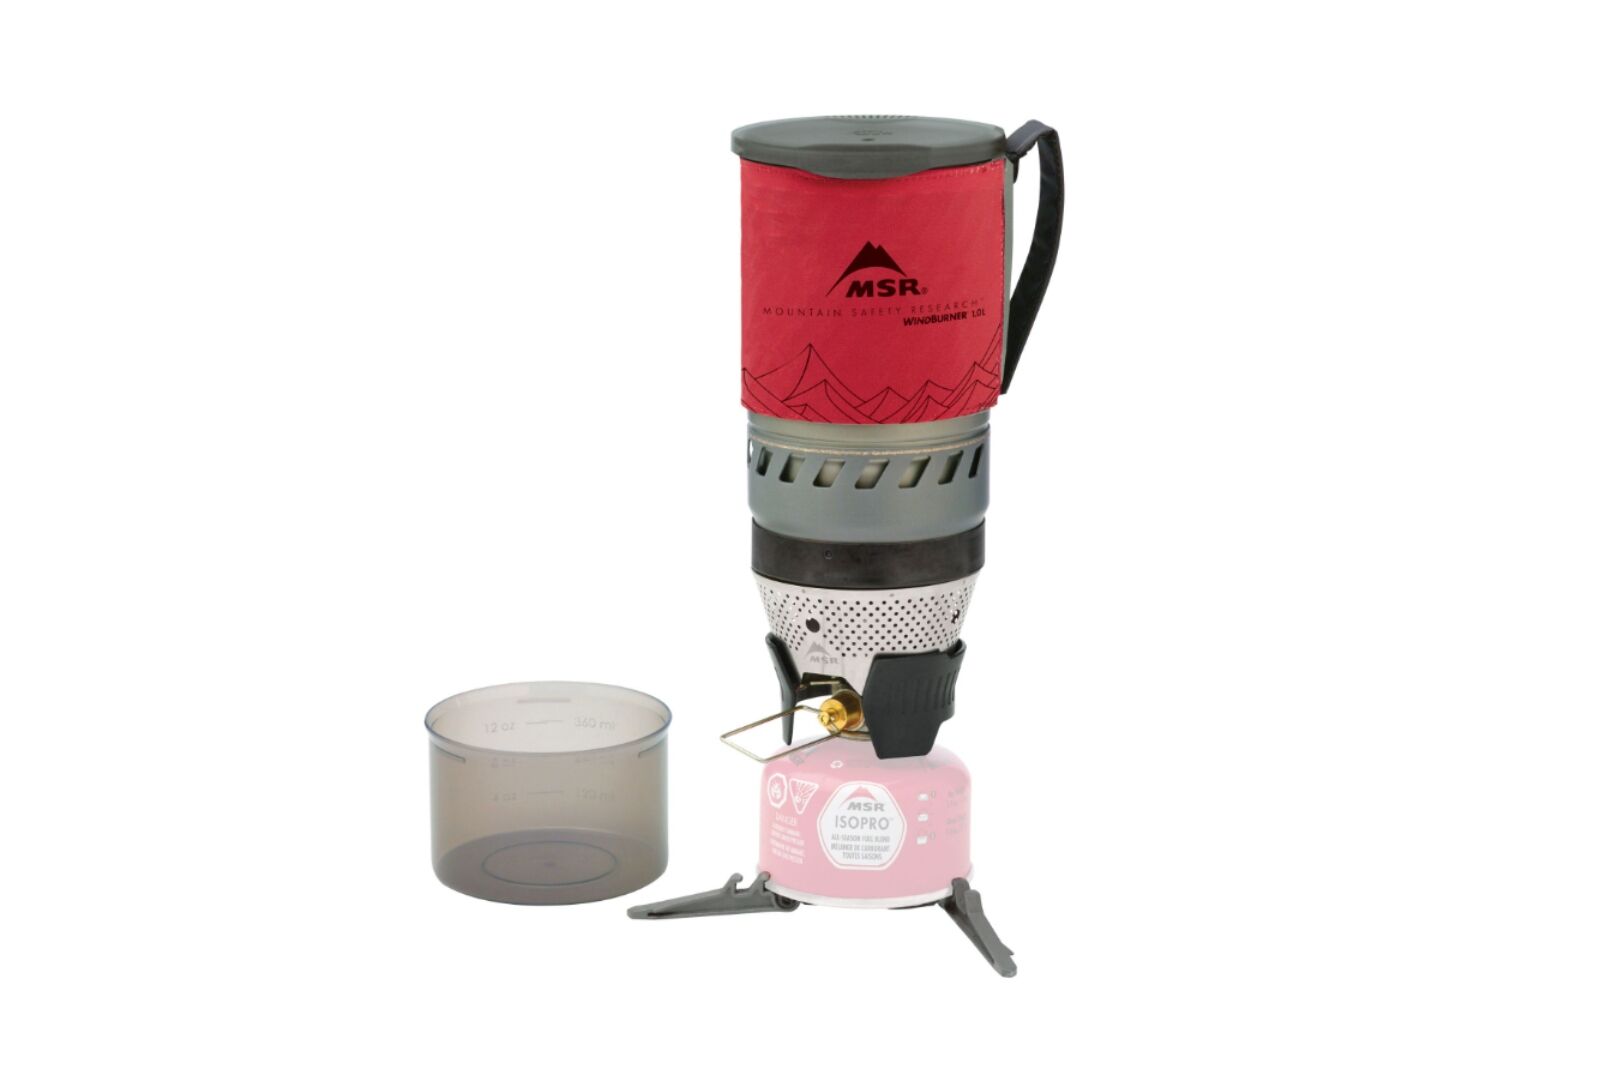 MSR WindBurner windproof camping and backpacking stove system